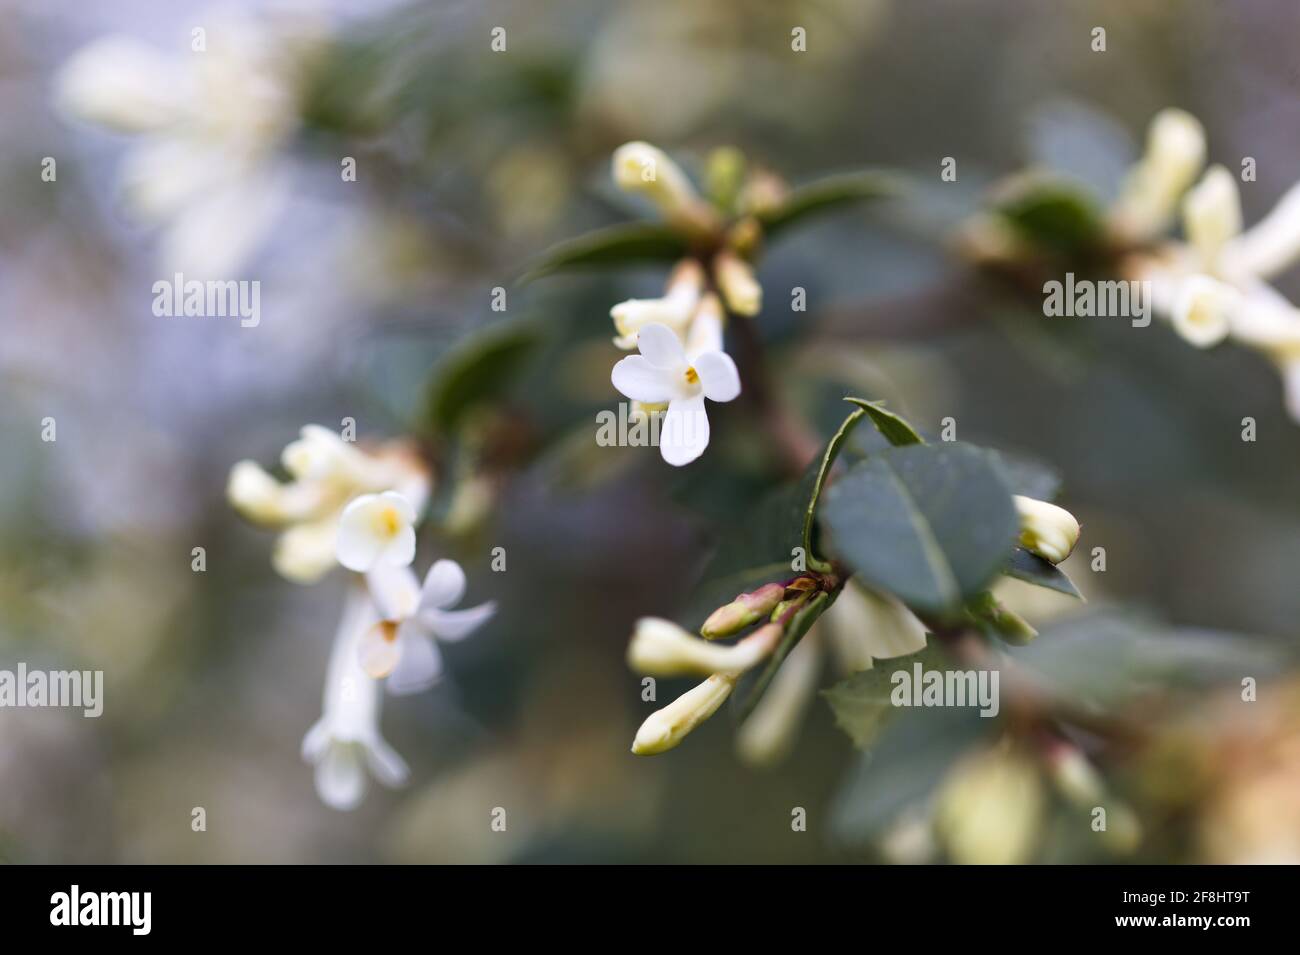 Close-up view of flowering evergreen shrub, Sweet Olive / Osmanthus delavayi, Diffused focus effect Stock Photo